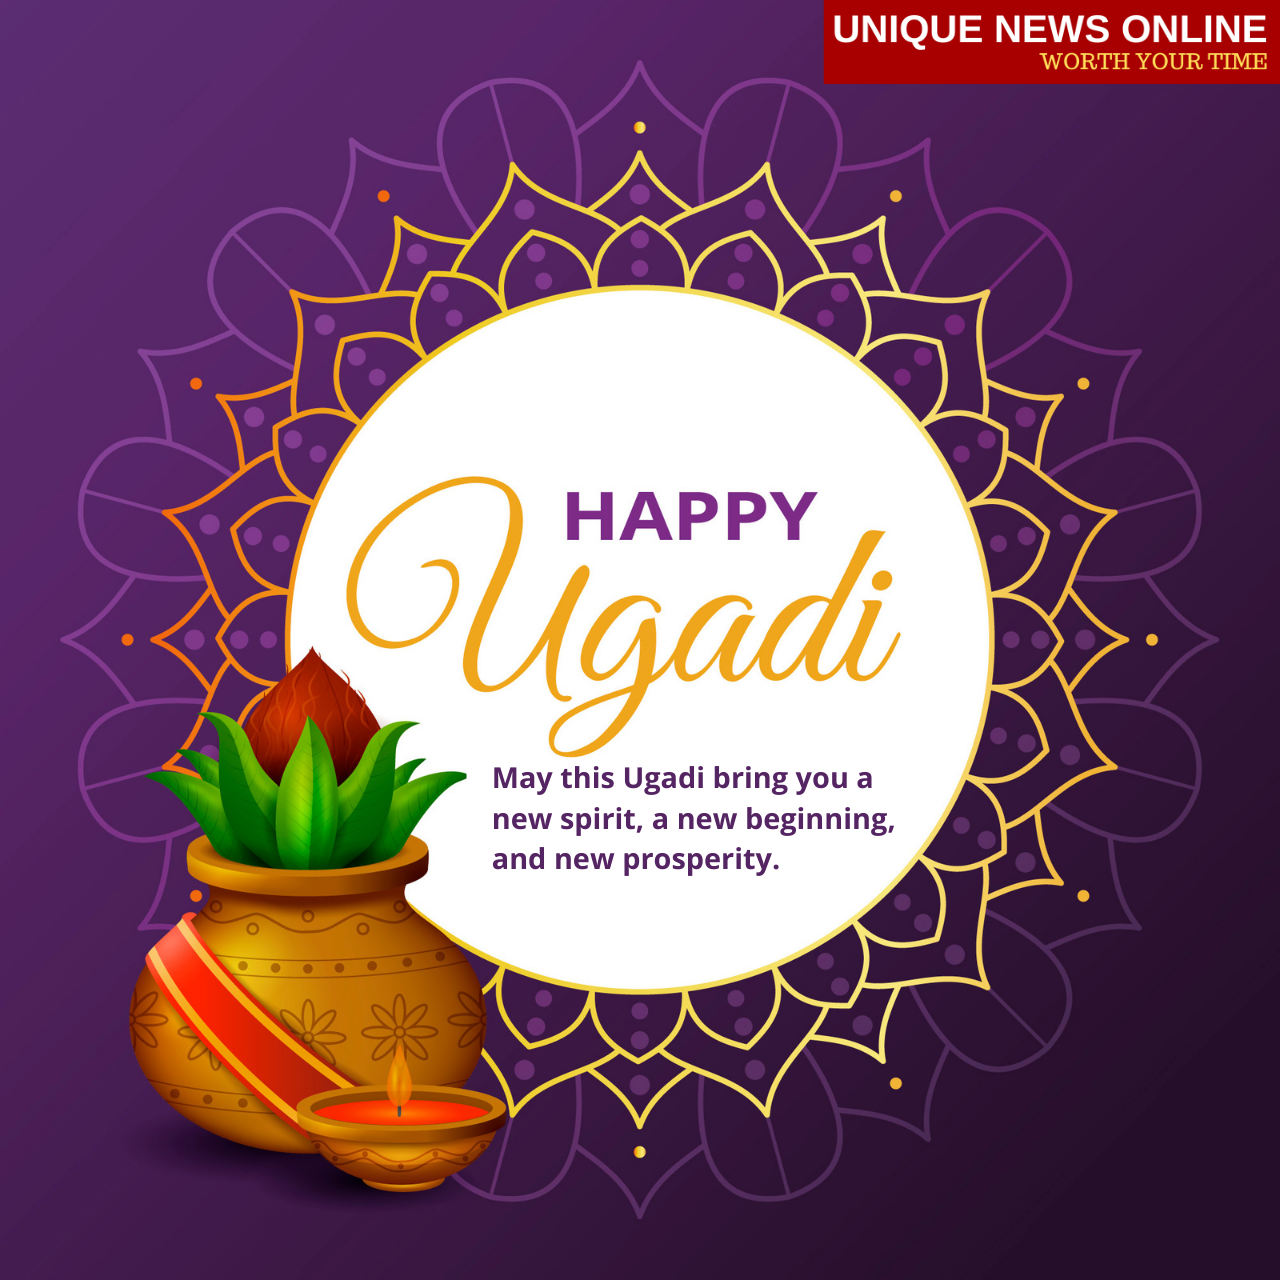 Happy Ugadi 2021 Wishes, Images, Greetings, Quotes, and Messages to ...